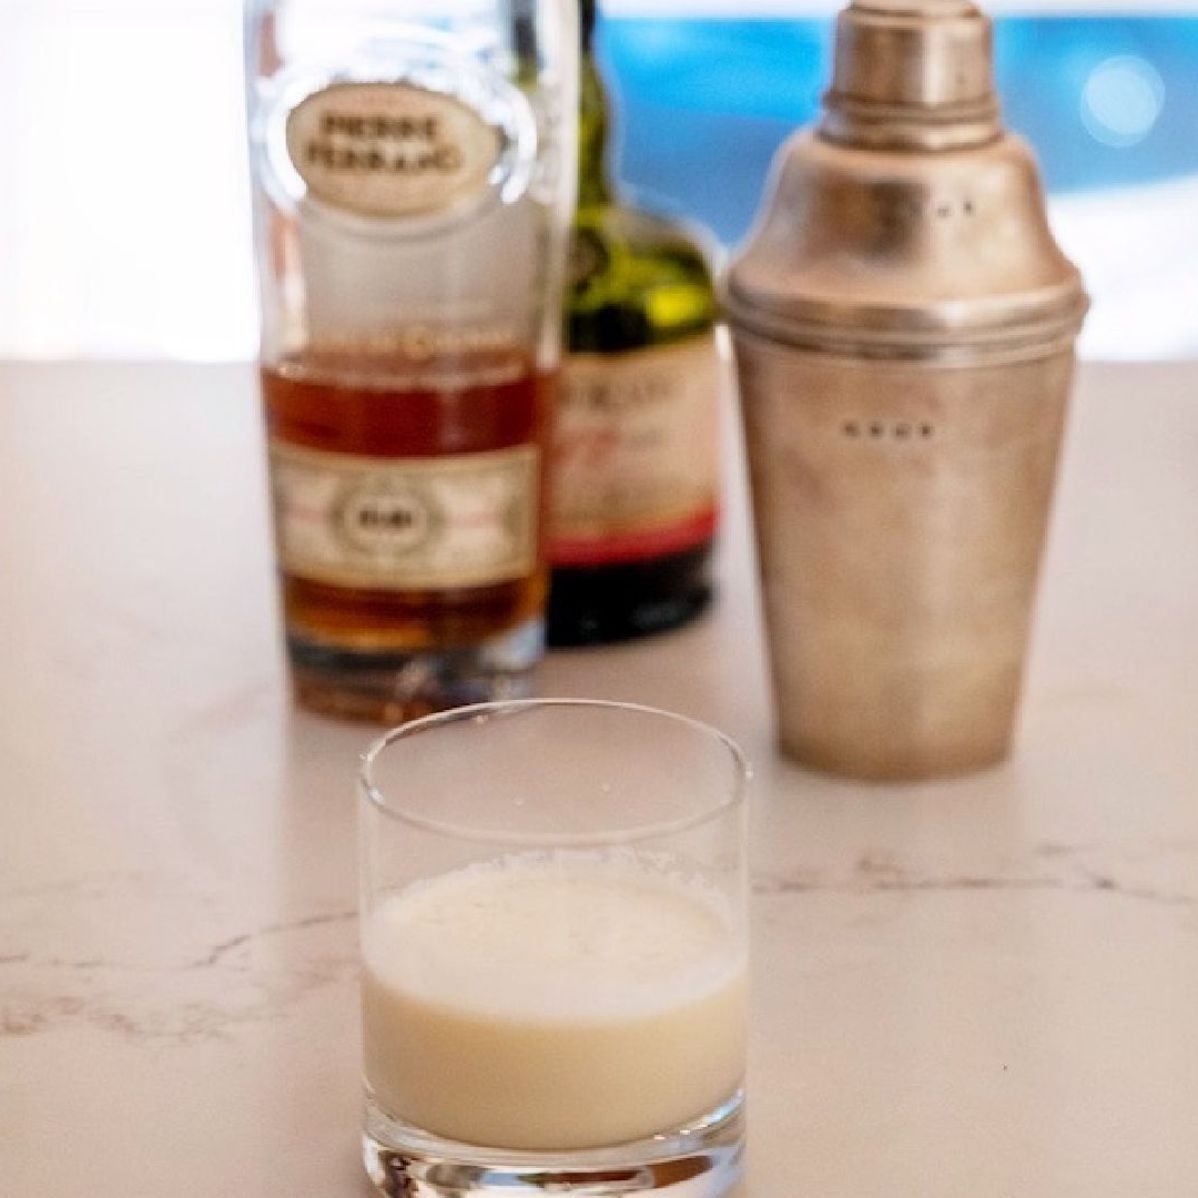 This drink is a riff on the Parisian Blond from the Savoy Cocktail Book, and a traditional White Russian. The rum and cognac both have lots of vanilla notes. The fats in the cream help to amplify the flavors. Feel free to adjust the sweetness with more or less simple syrup.